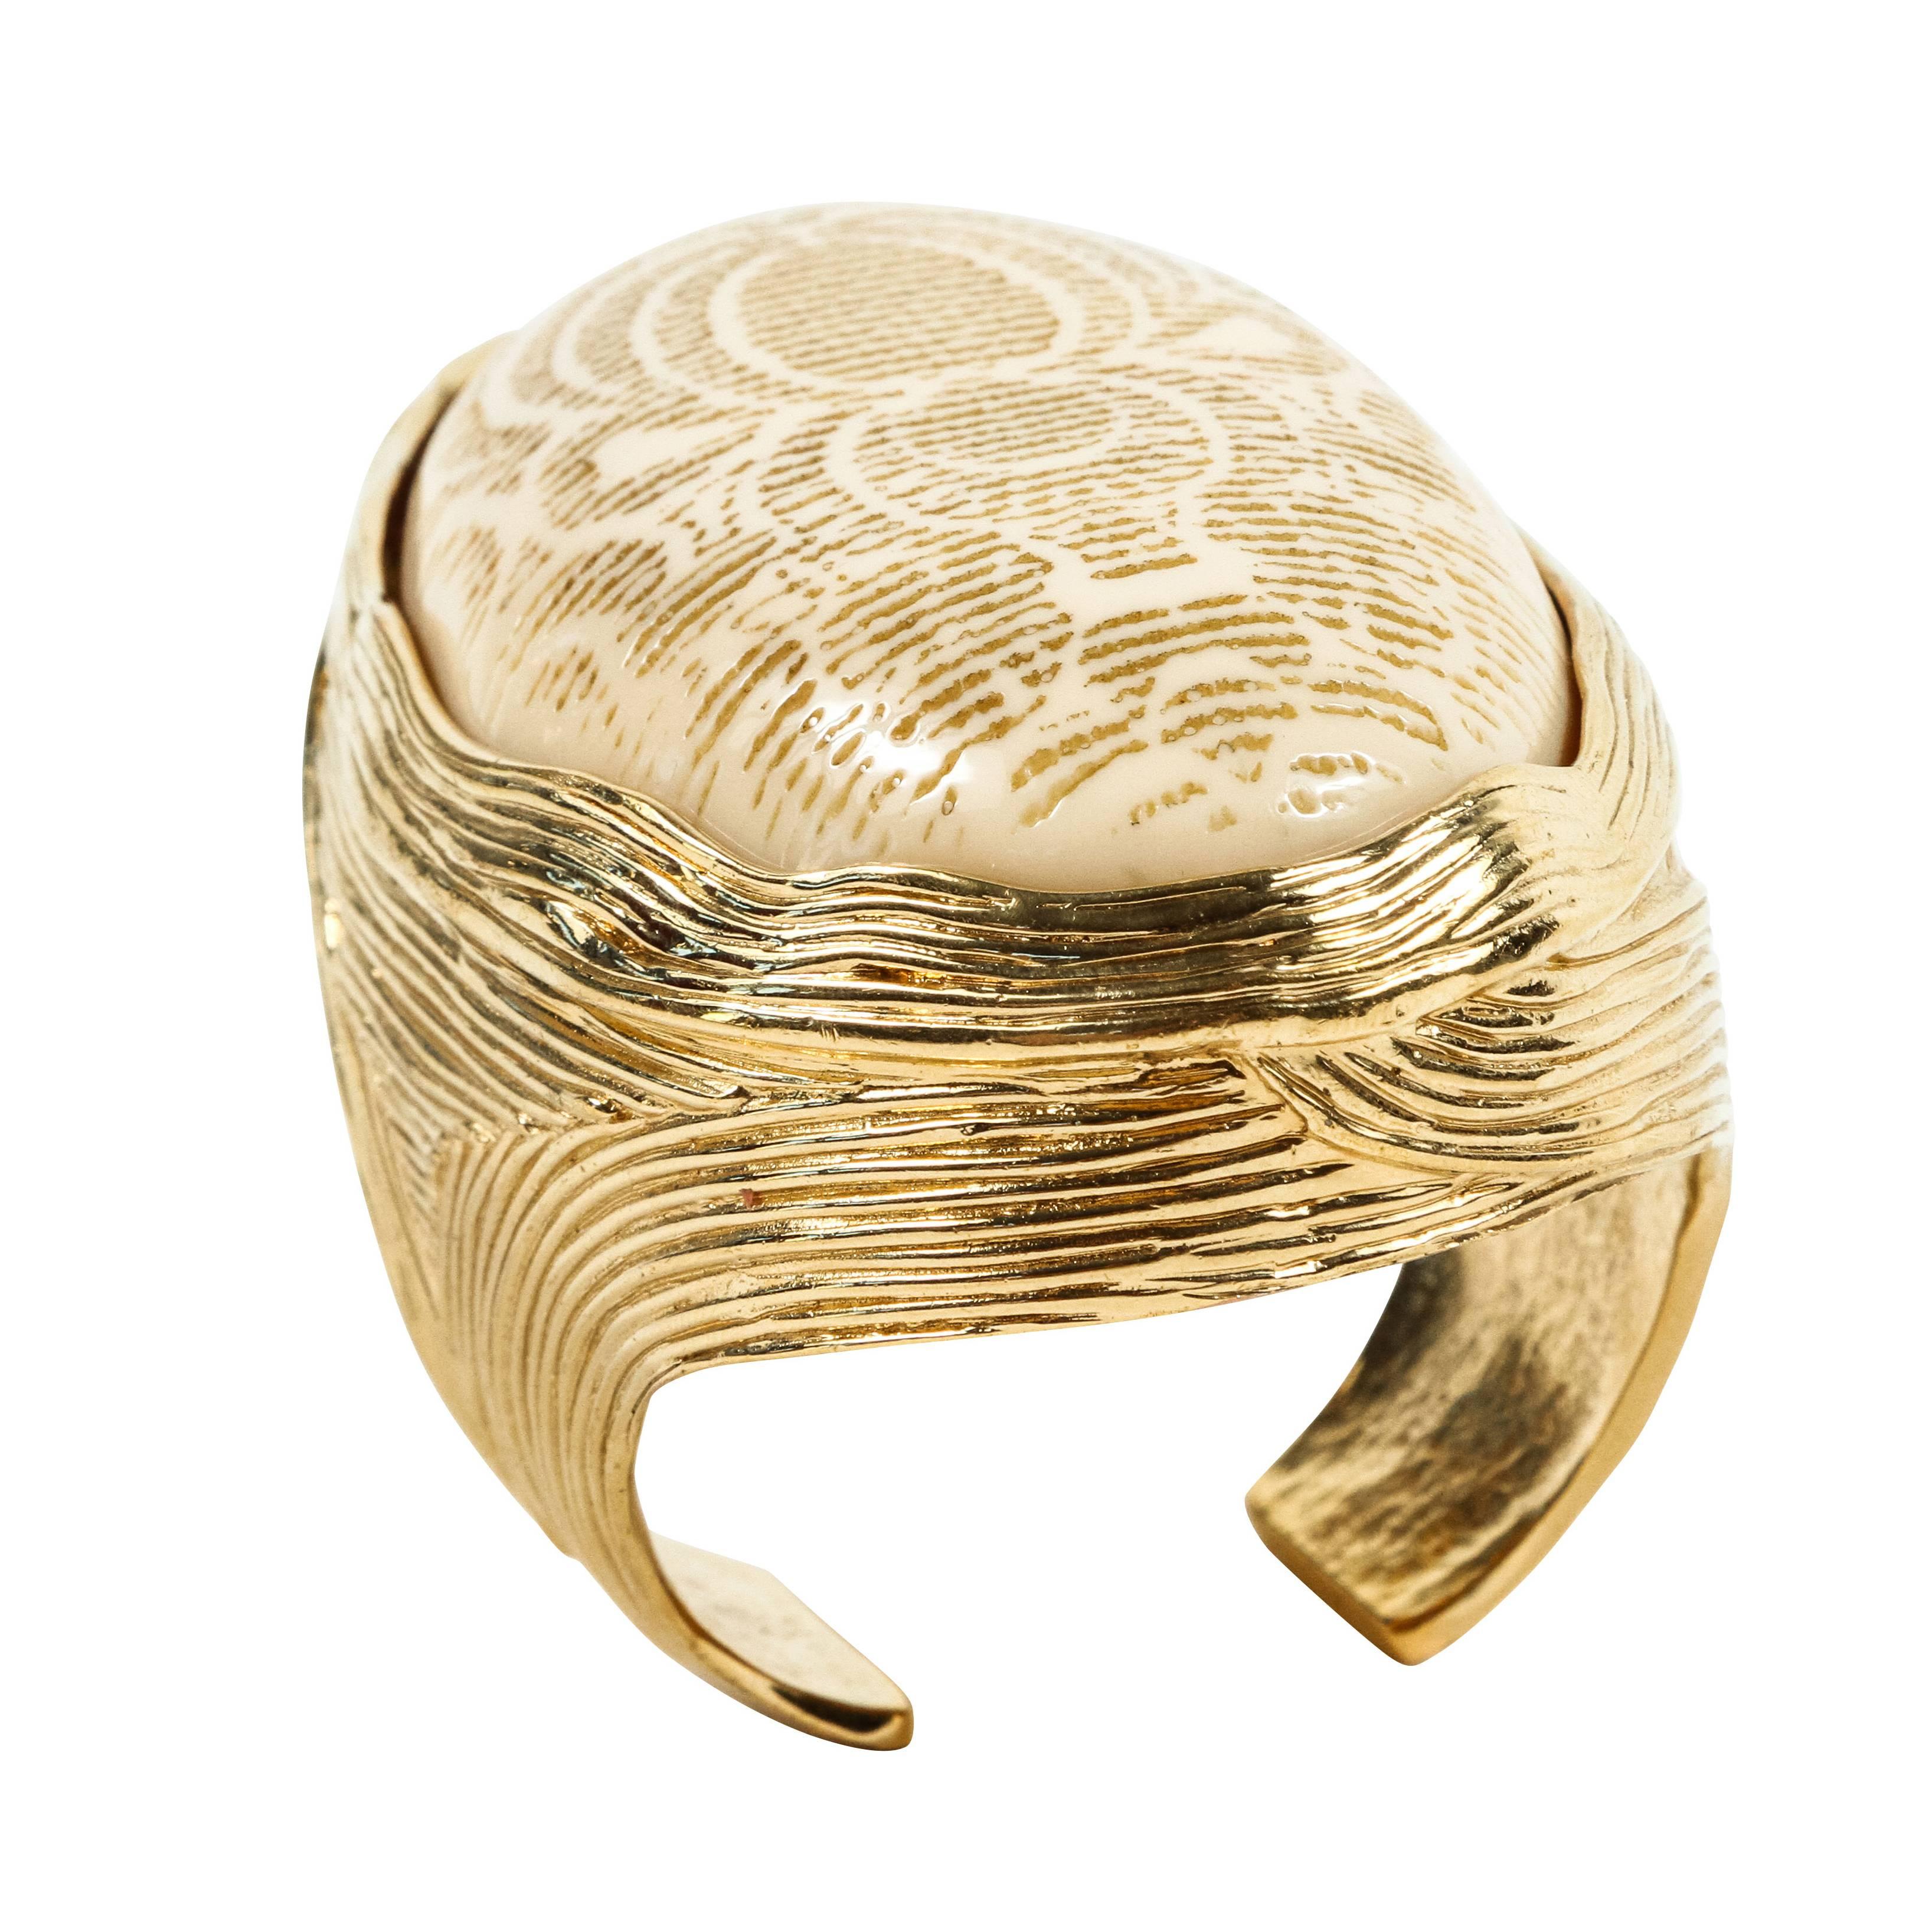 Unique and Impressive Cuff by Yves Saint Laurent 